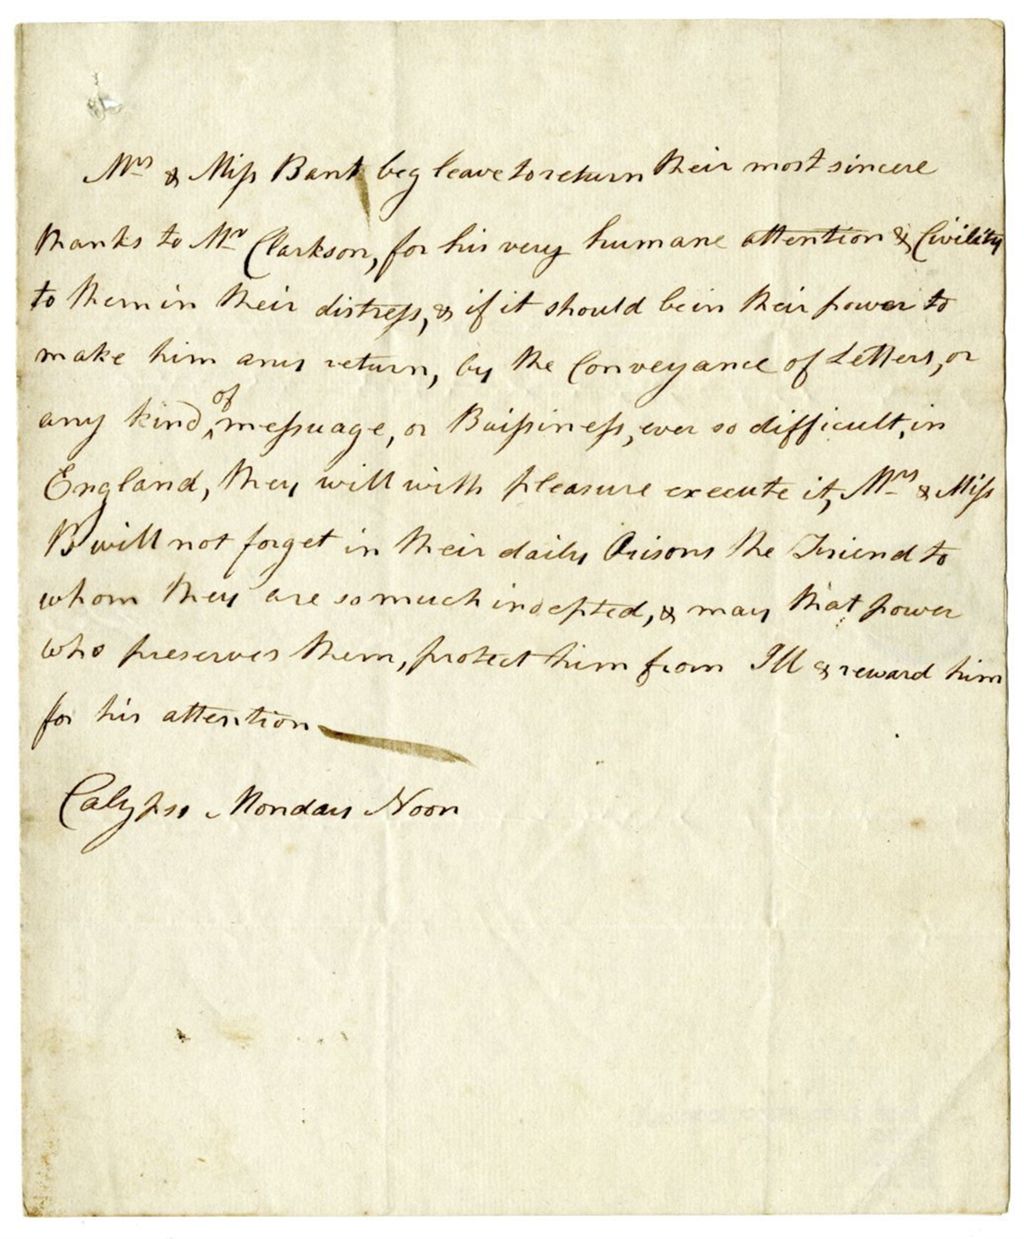 Miniature of Letter from Calypso Monday Noon (?) to John Clarkson